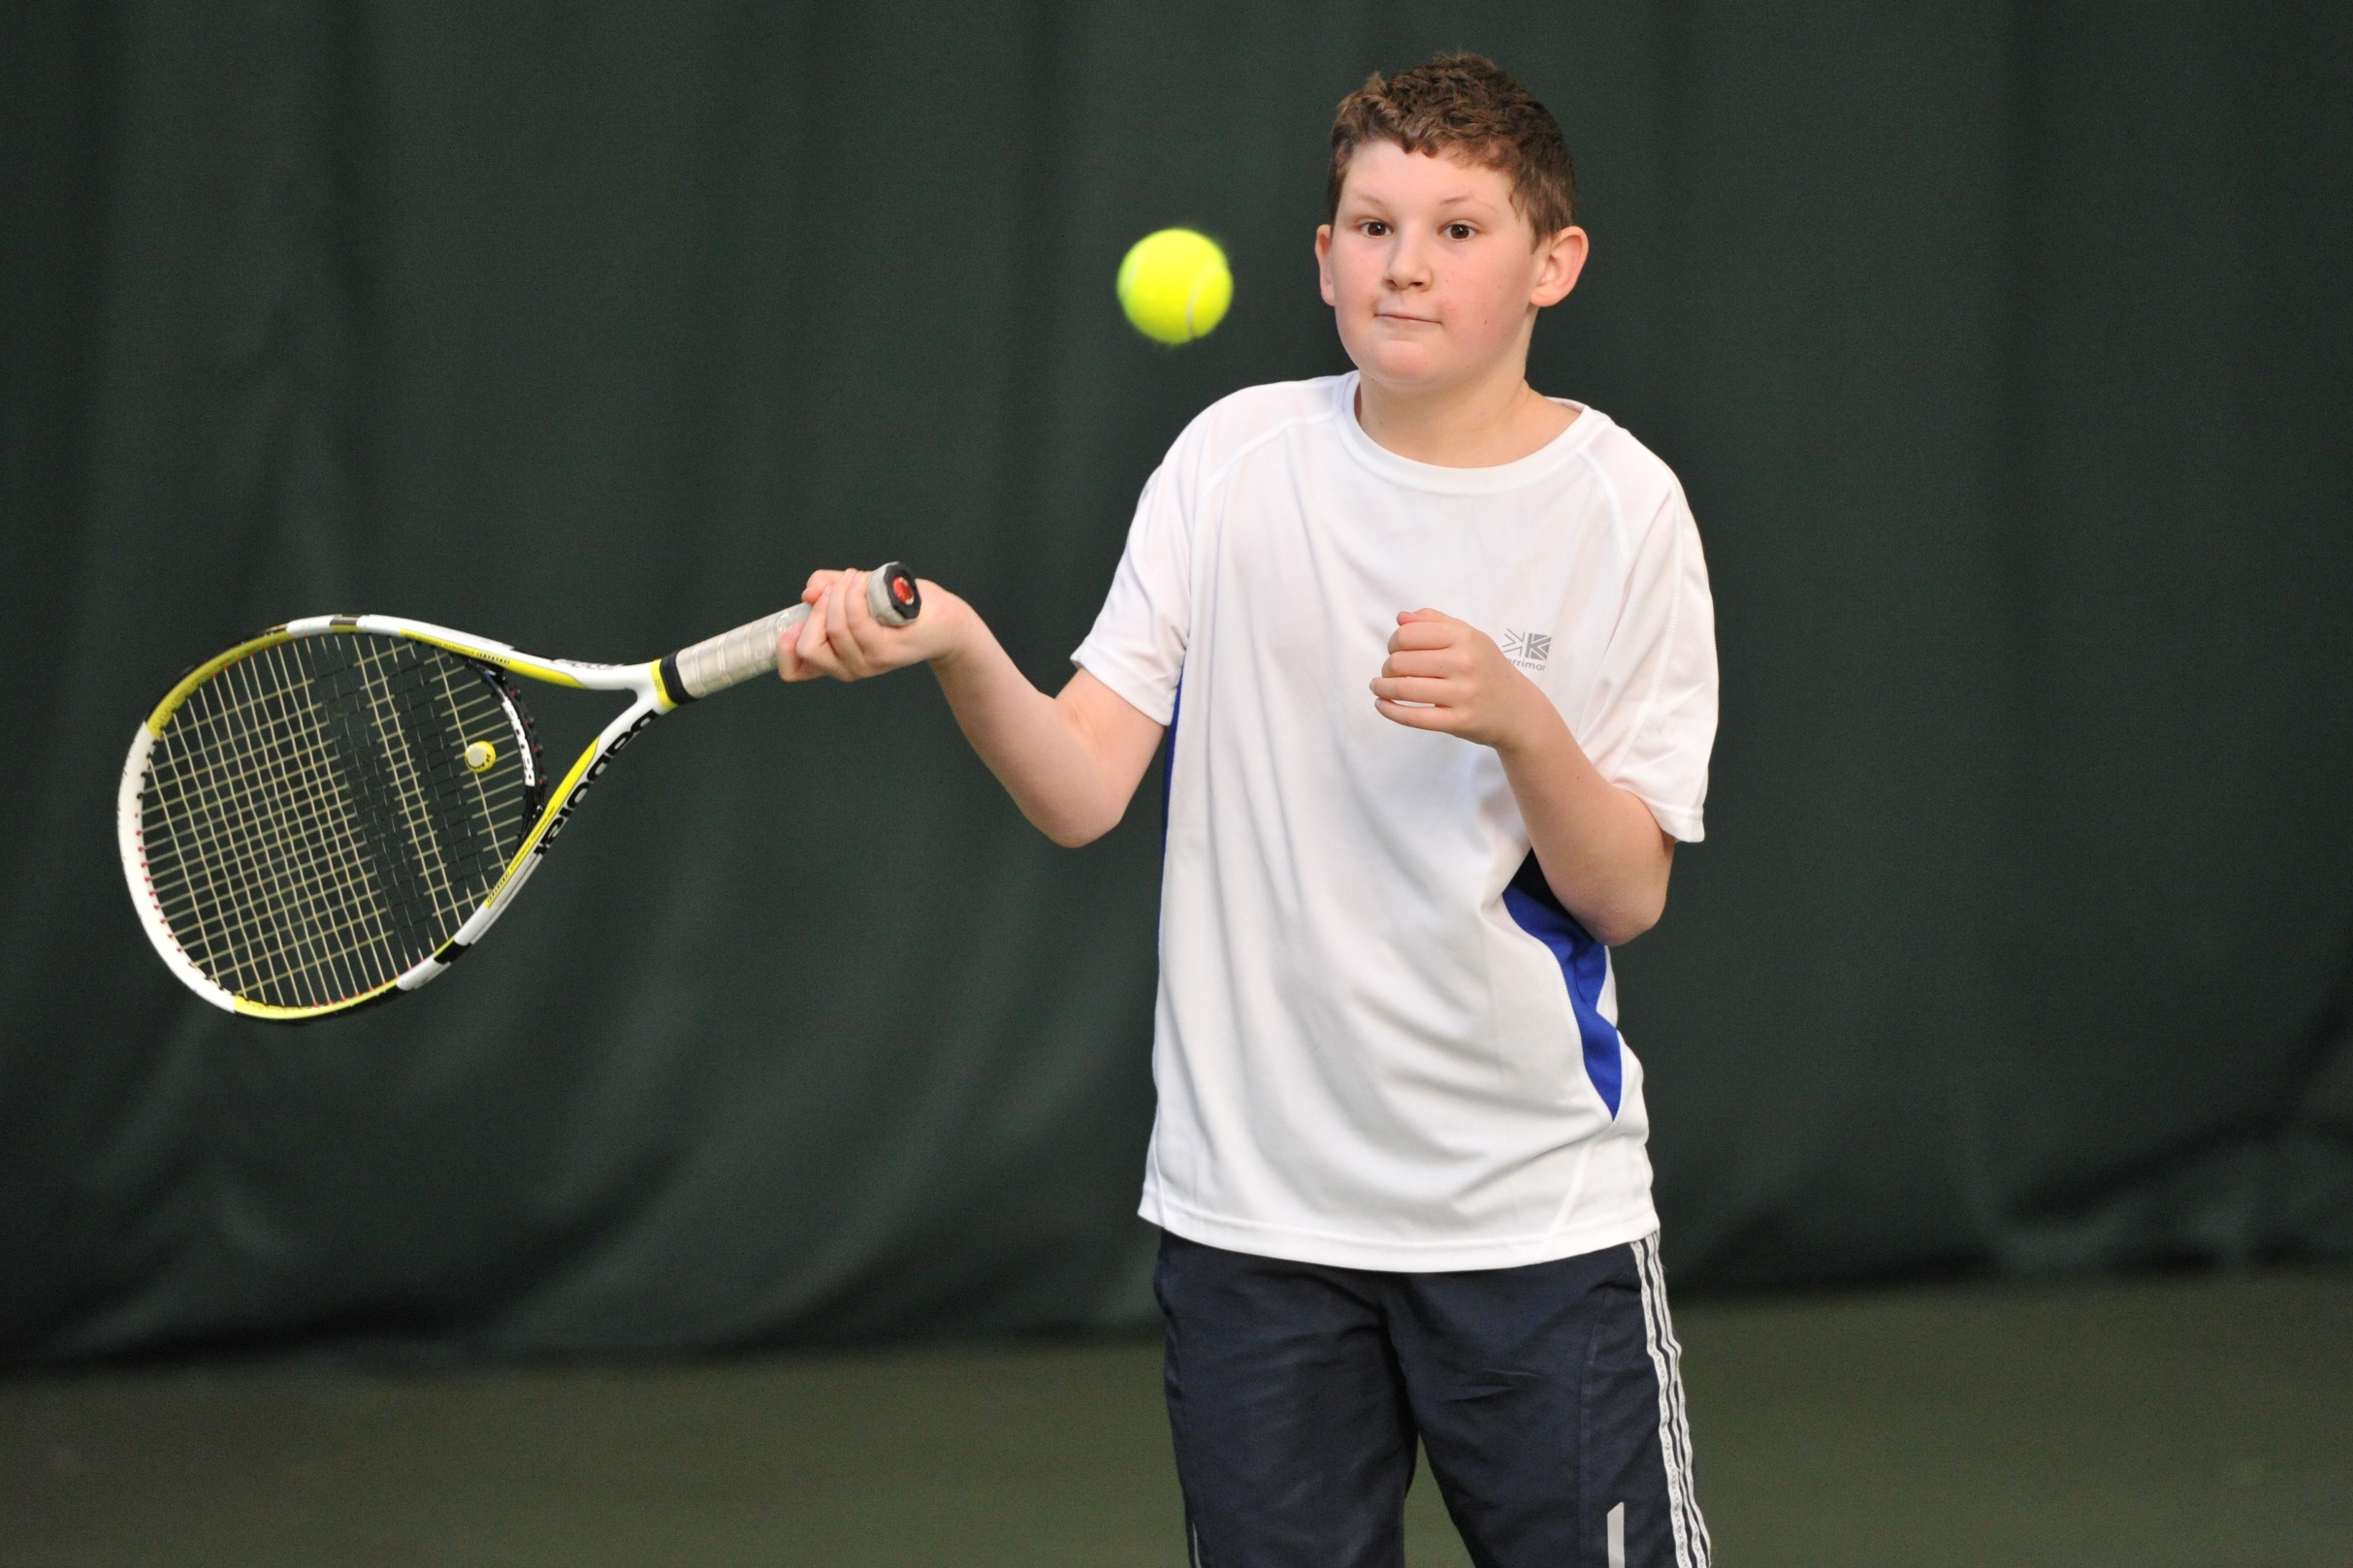 Learning disability tennis